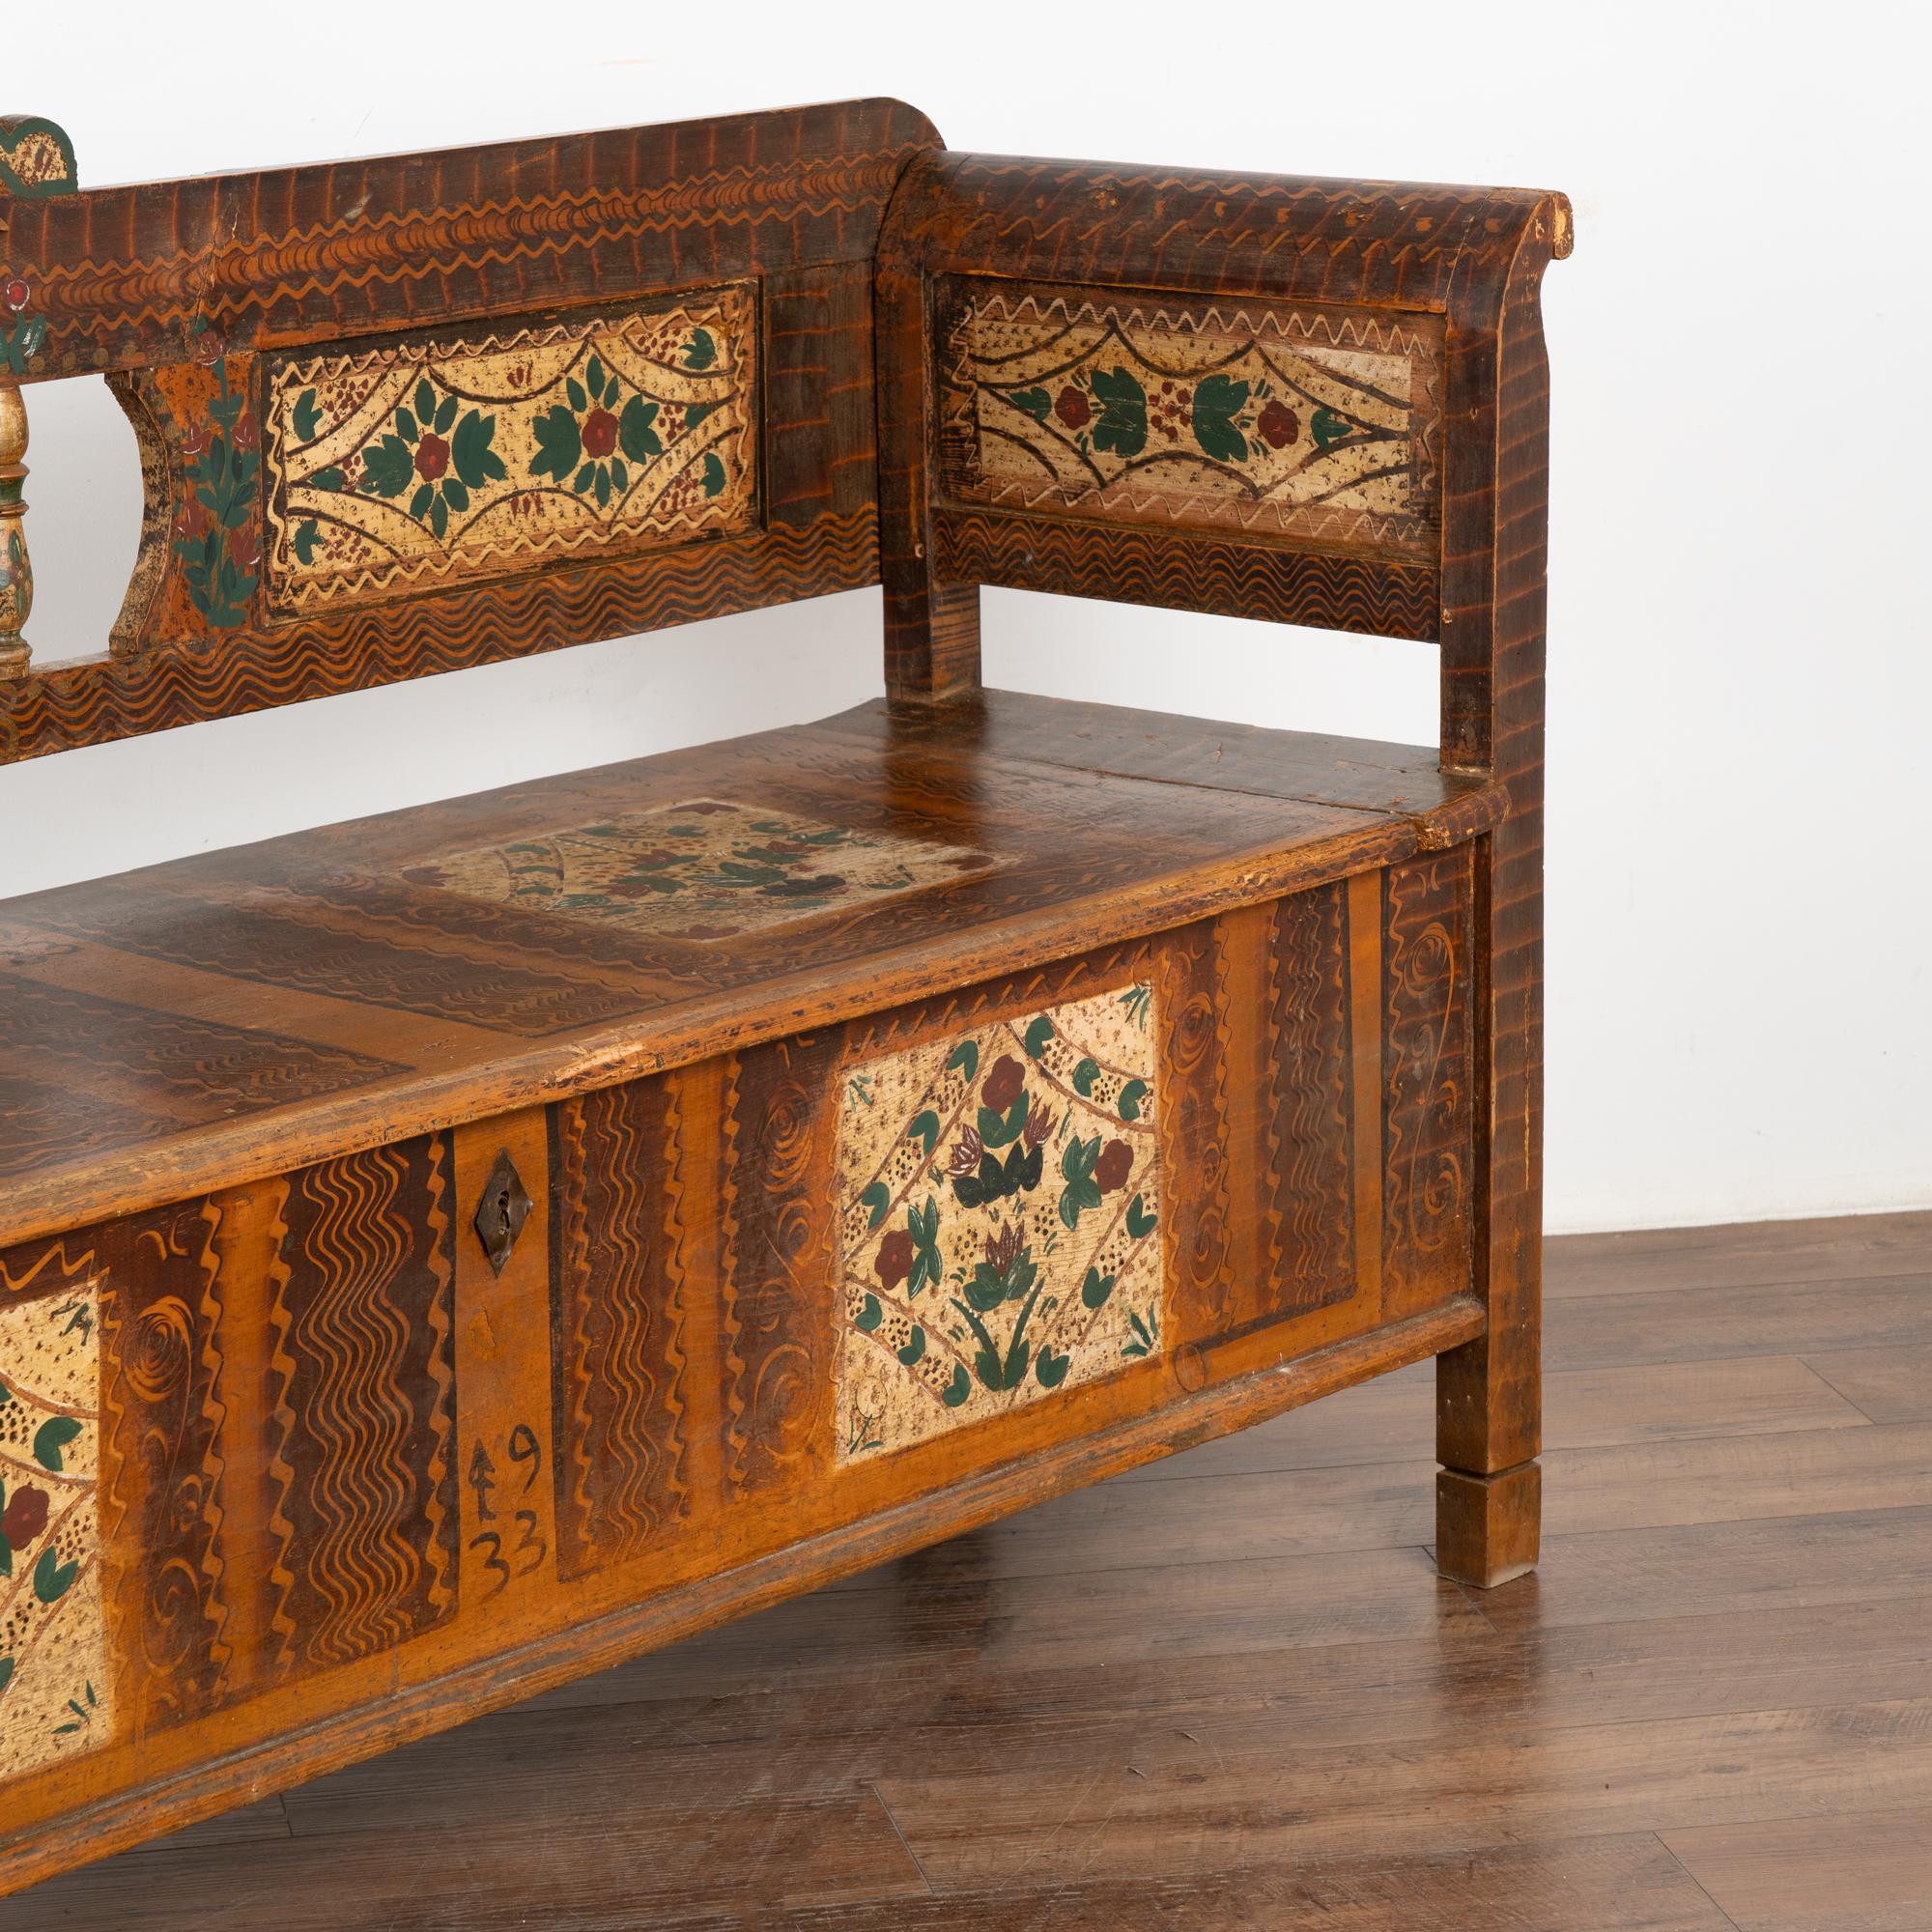 Original Painted Folk Art Bench With Carved Birds, Hungary dated 1933 For Sale 2